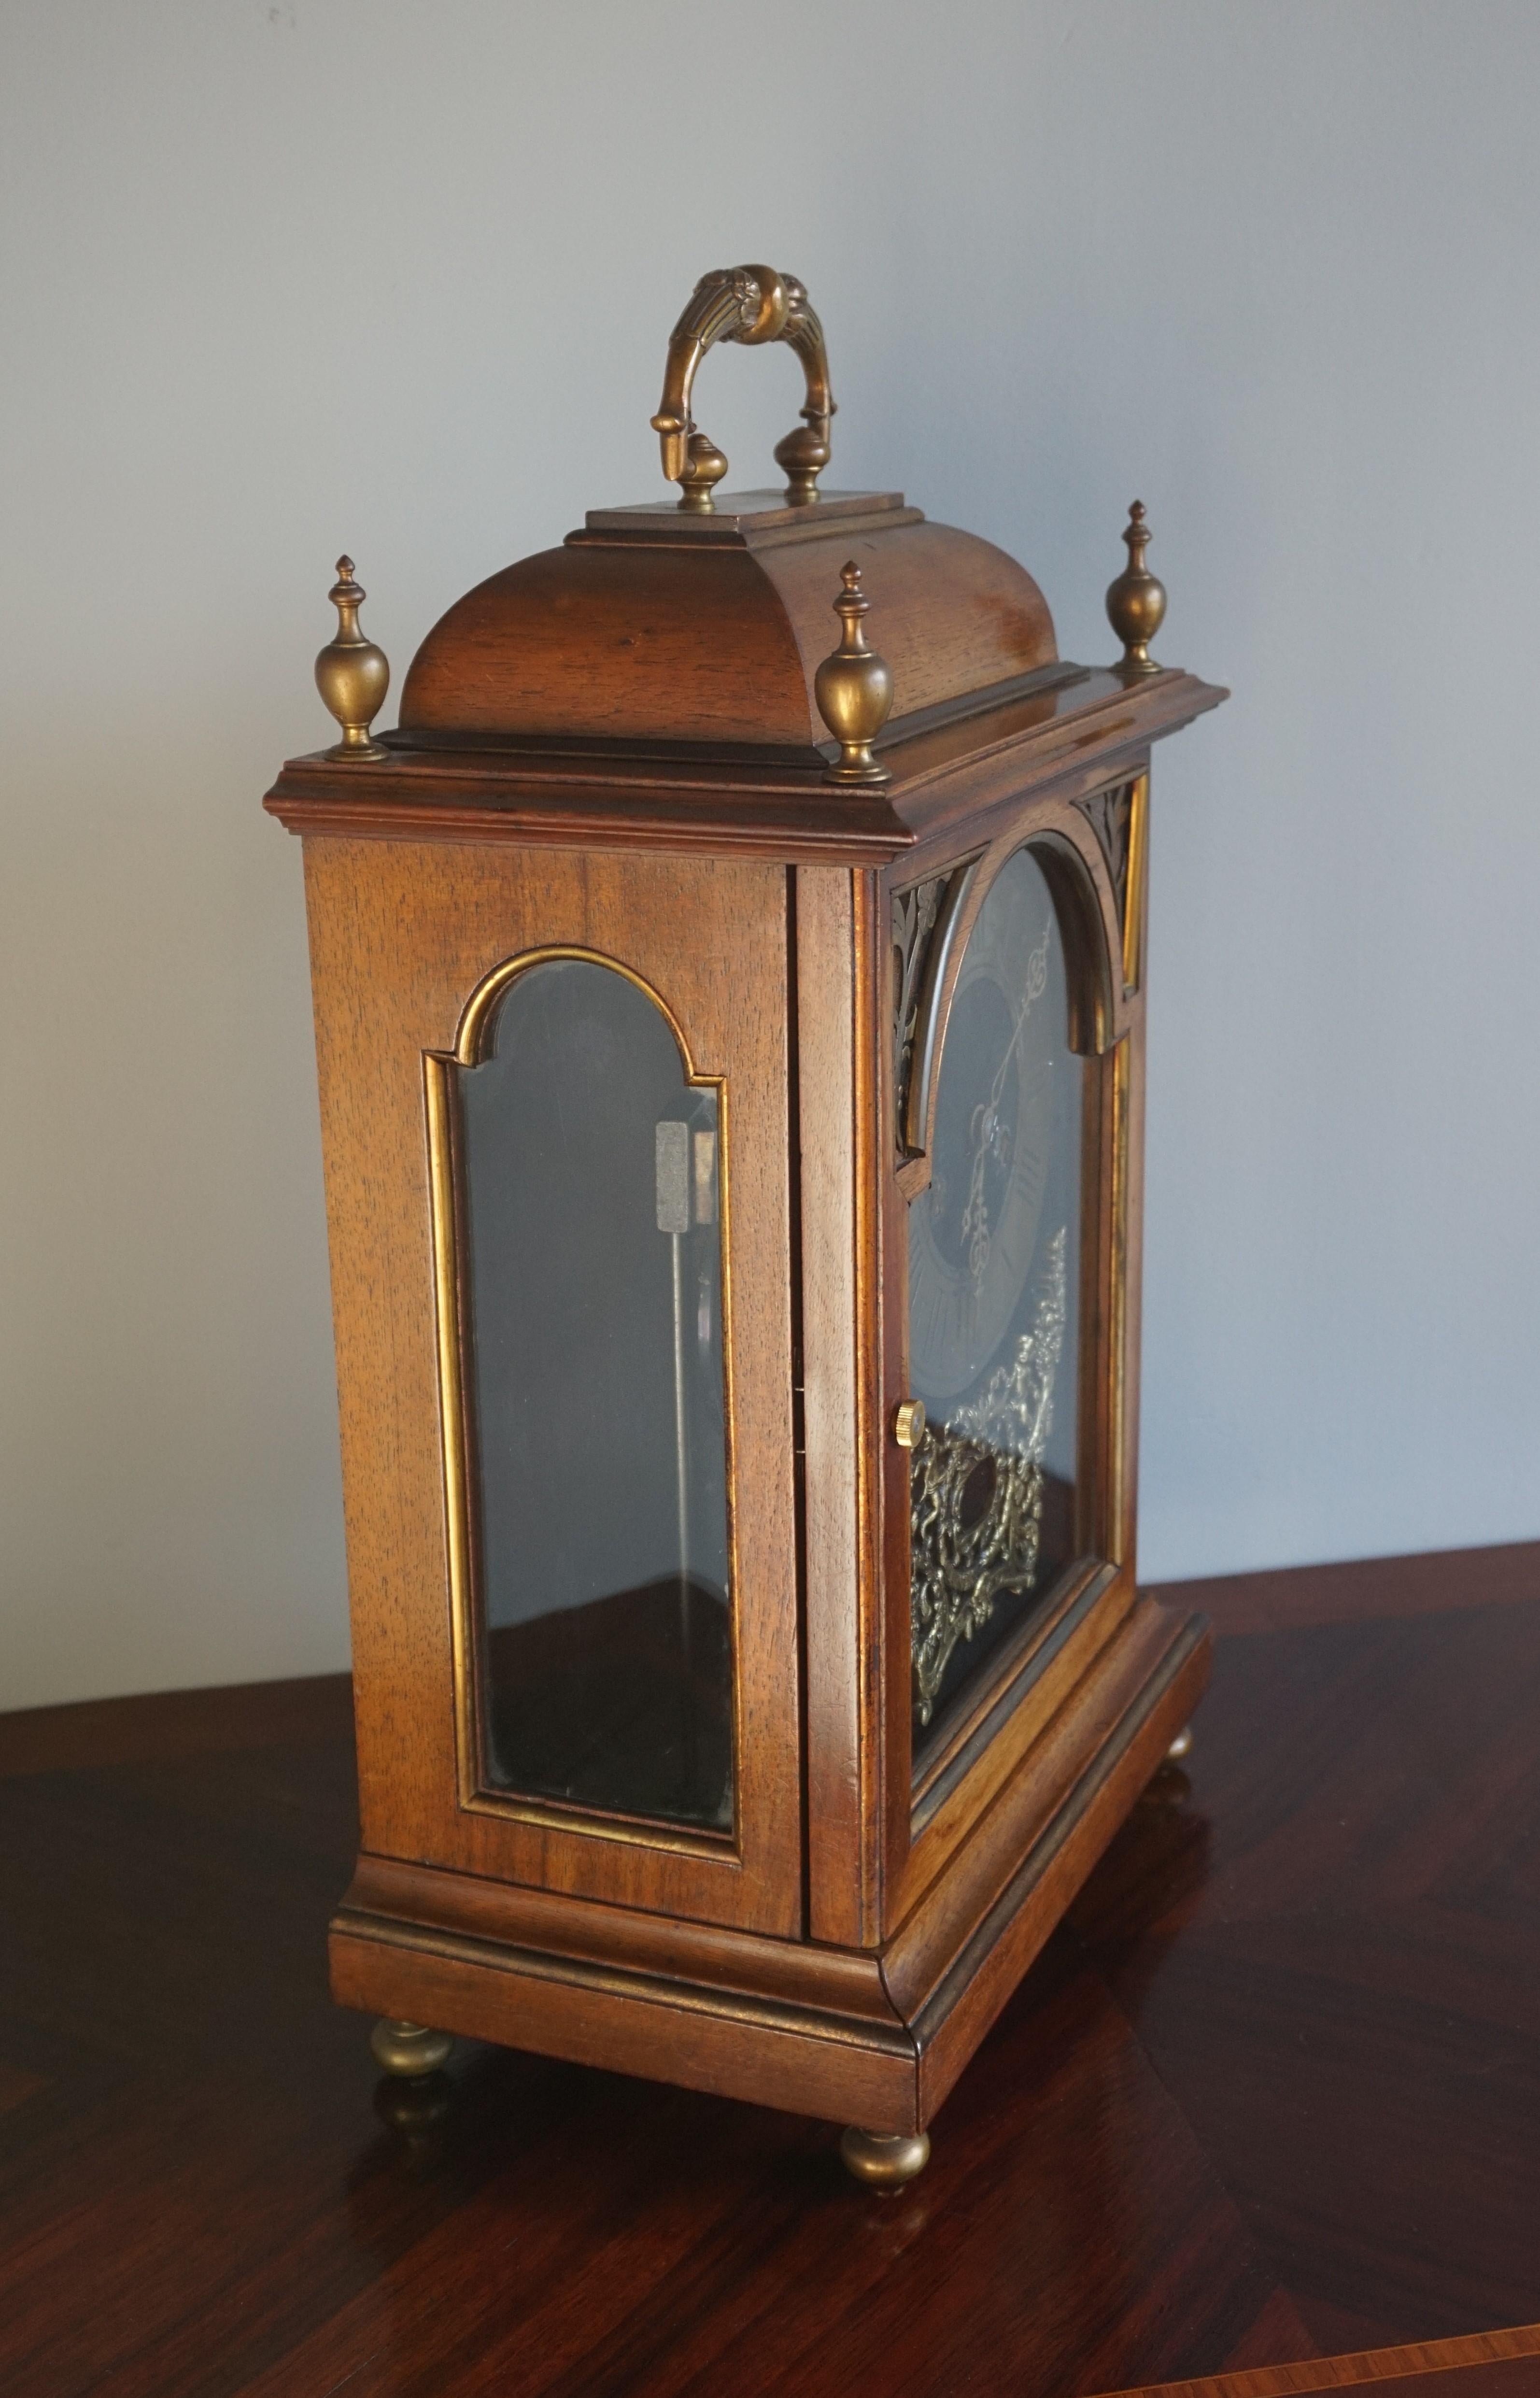 Large size, carriage style clock.

Every clock enthusiast knows about the small carriage clocks that the wealthiest people in the 19th century used to take with them when traveling over larger distances. These longer distances were mostly done via